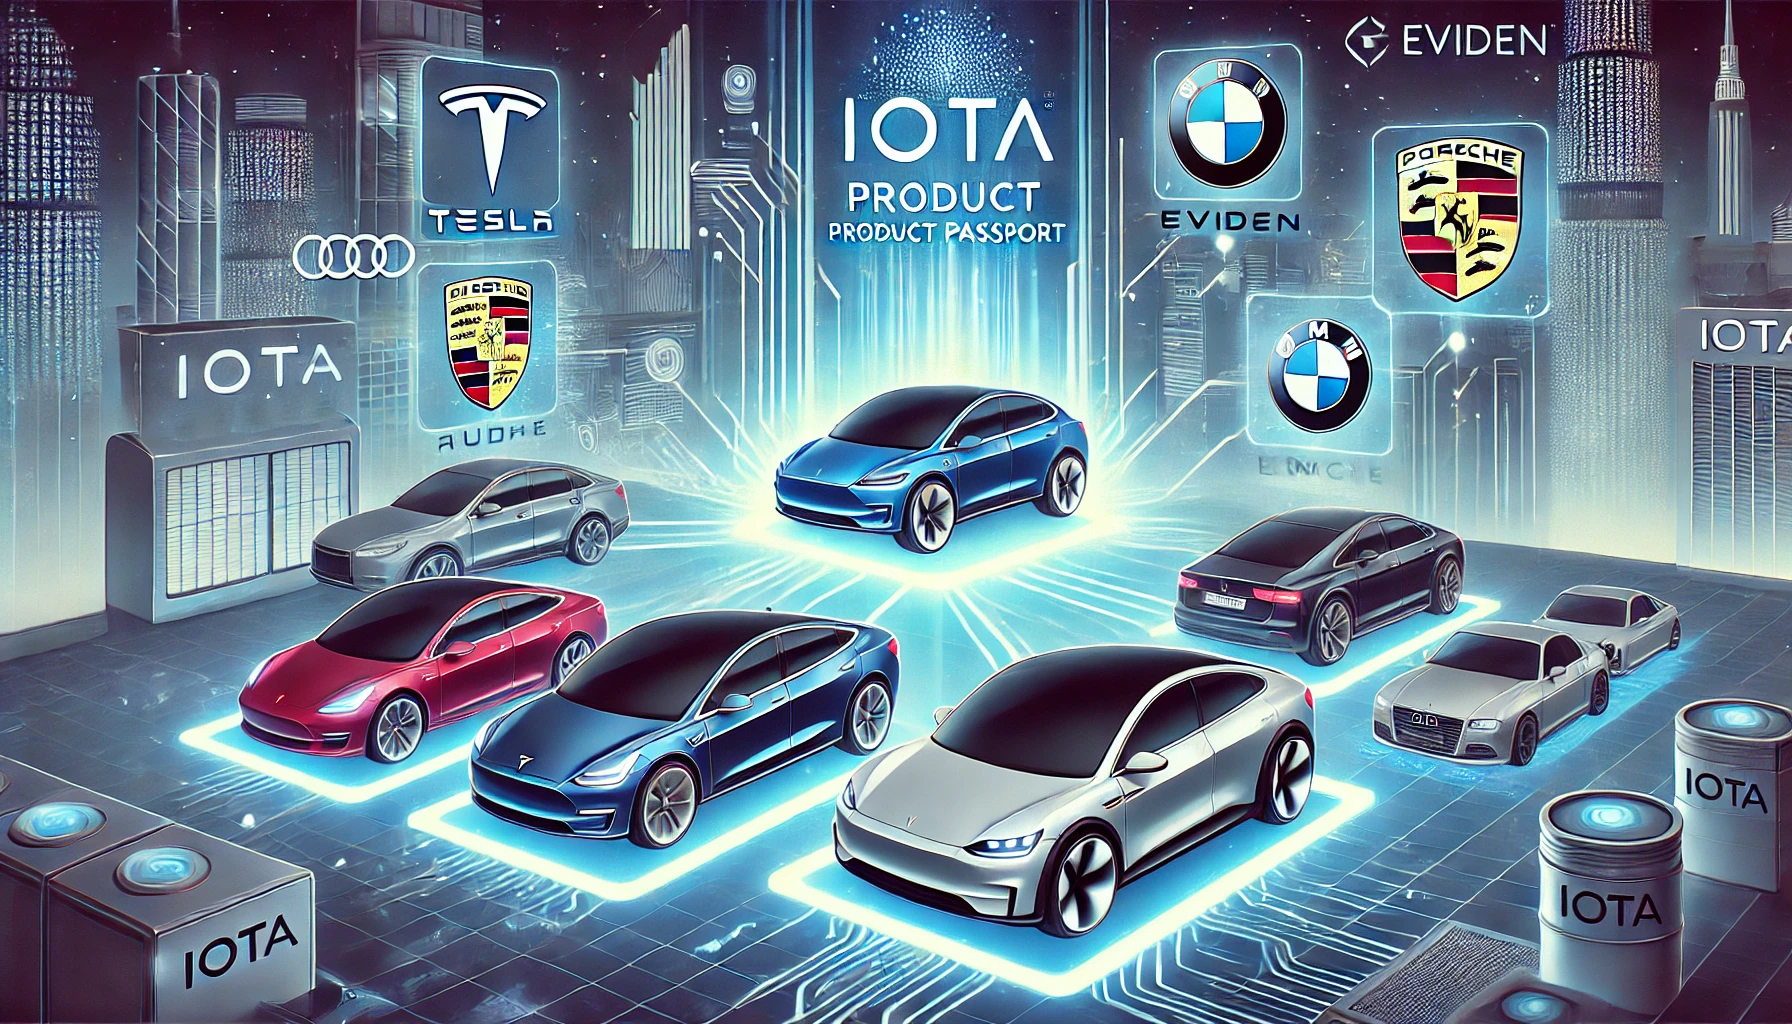 IOTA’s Product Passport Could Be Used by Tesla, Audi, Porsche, BMW, and VW After Eviden Partnership